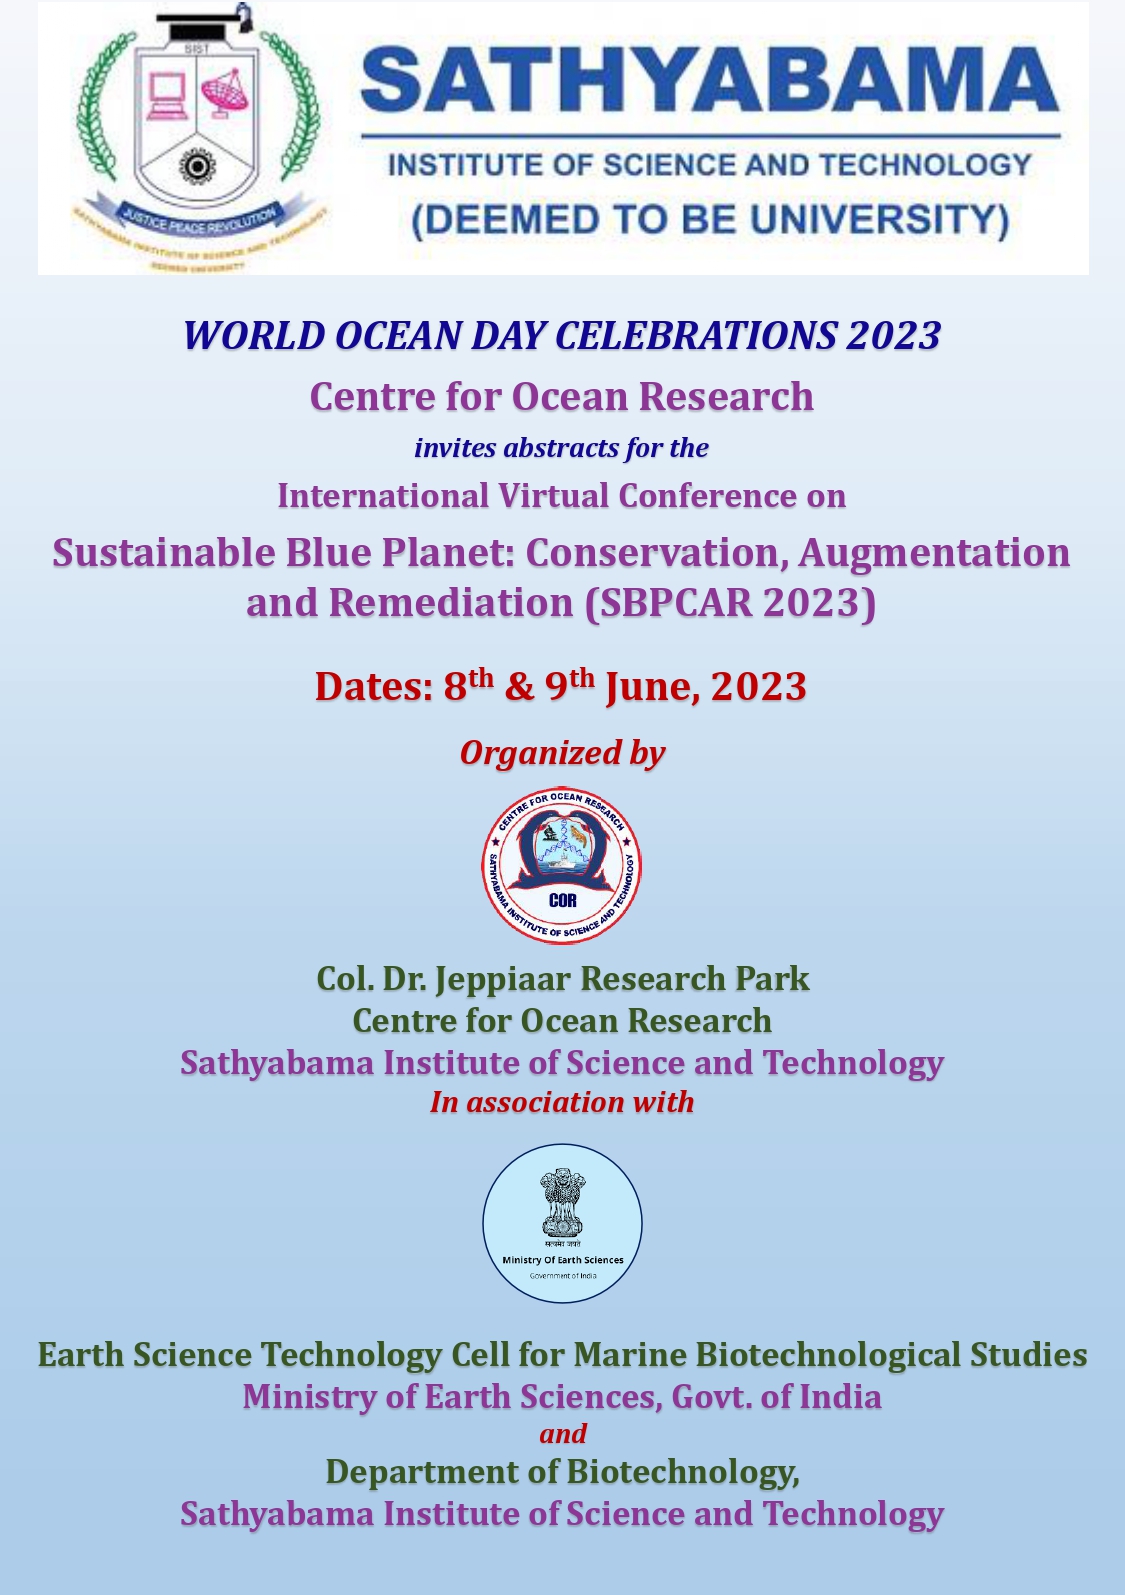 International Virtual Conference on Sustainable Blue Planet: Conservation, Augmentation and Remediation (SBPCAR 2023)